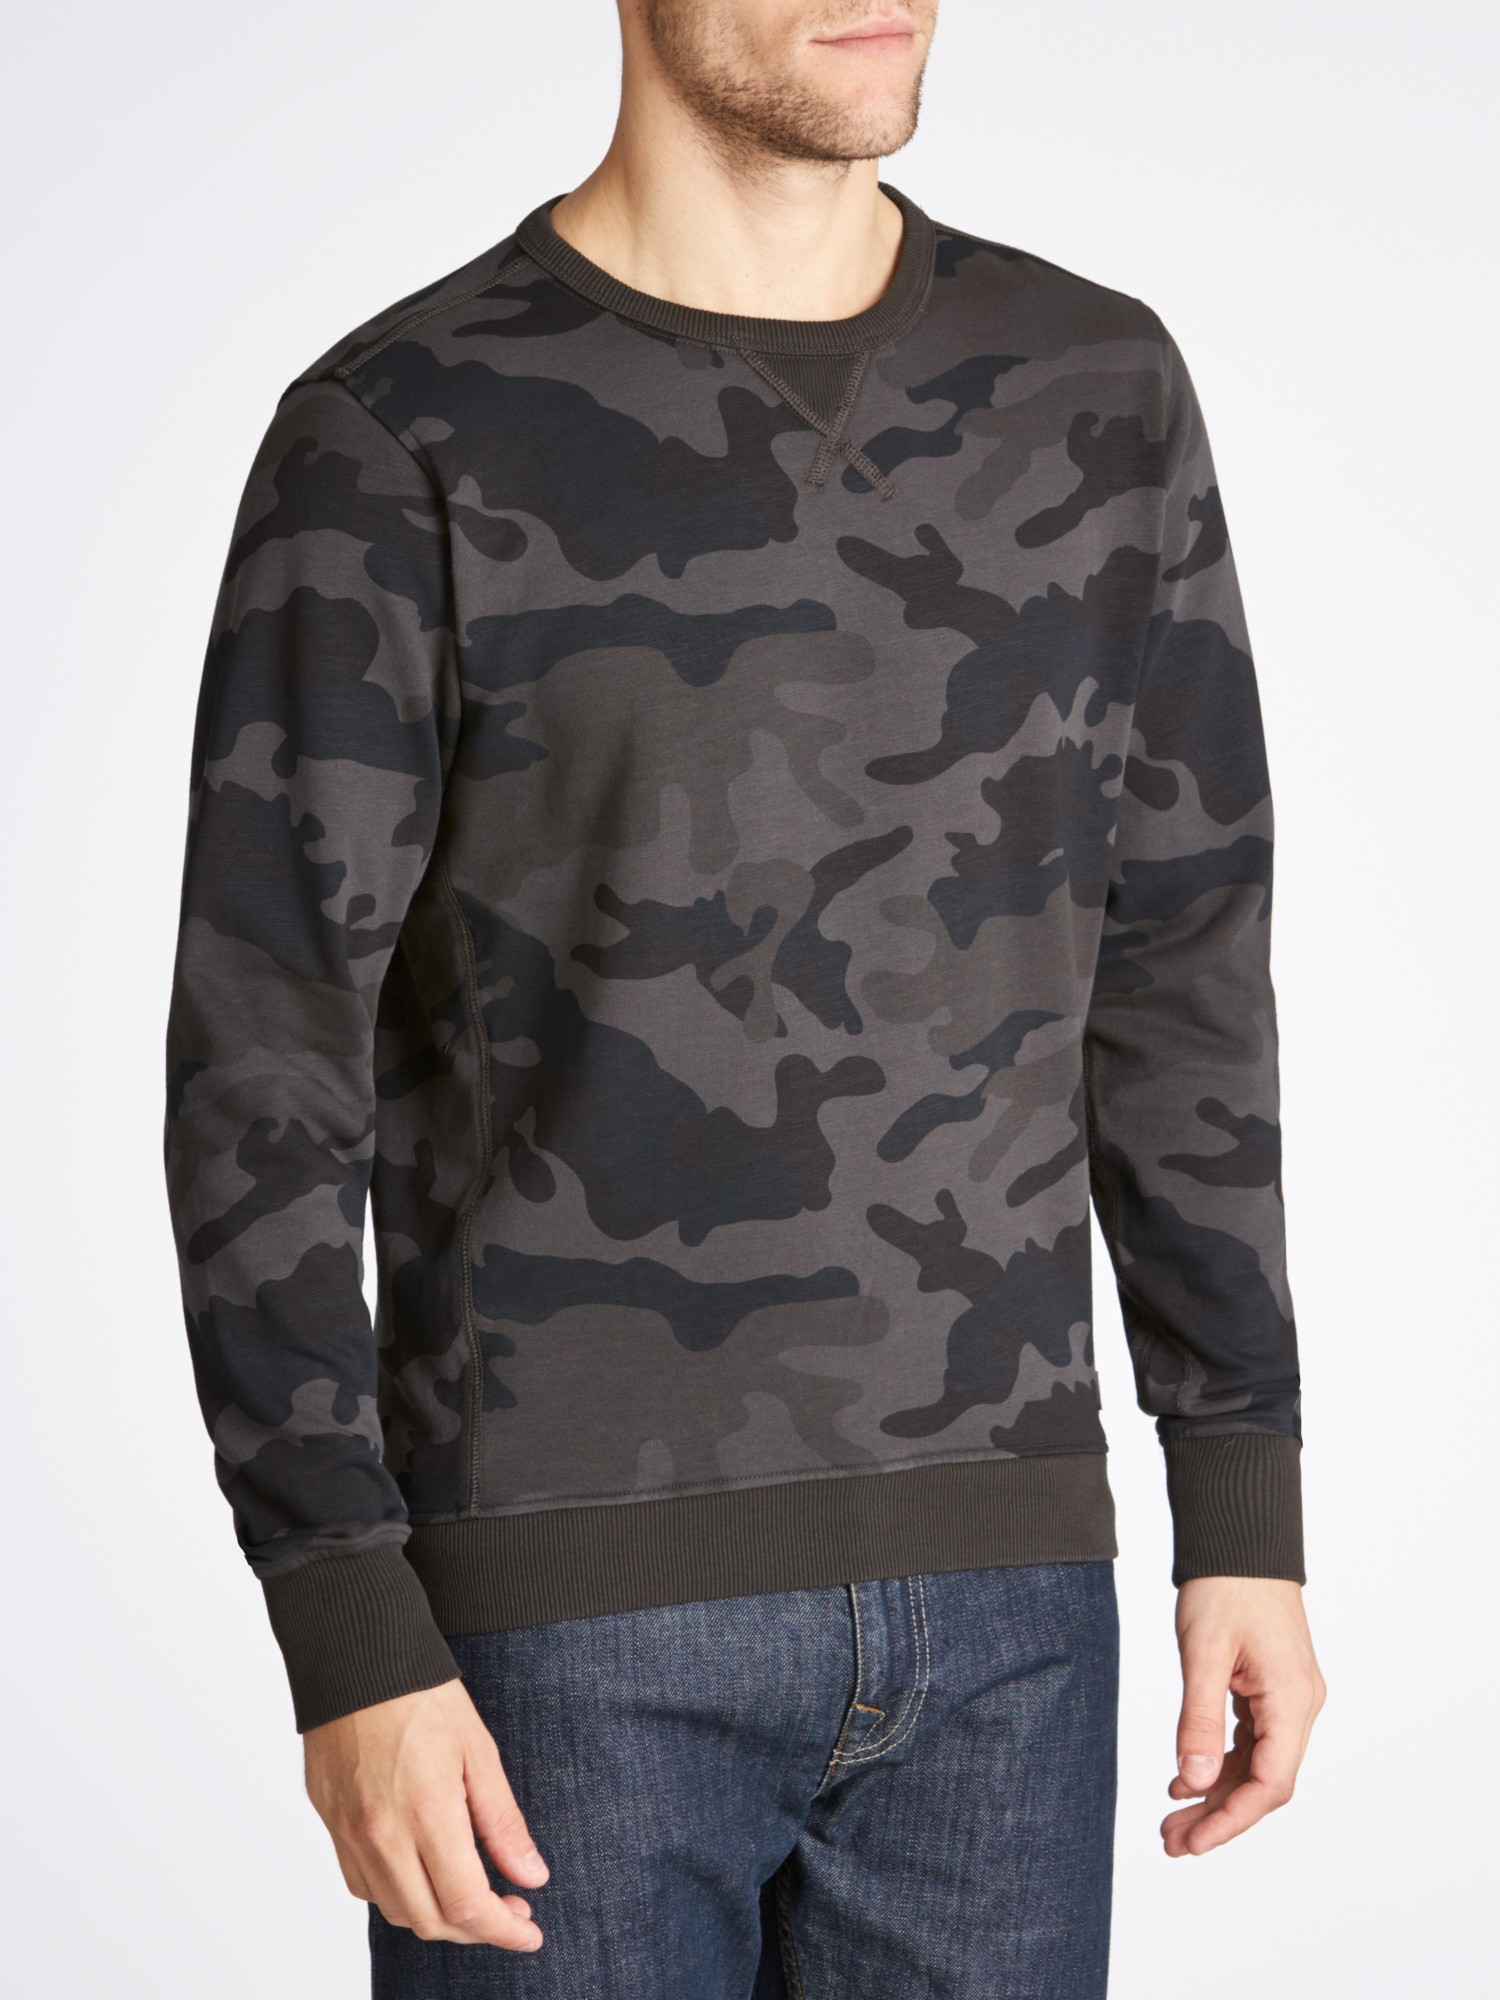 g star raw camo jumper, OFF 73%,Free delivery!